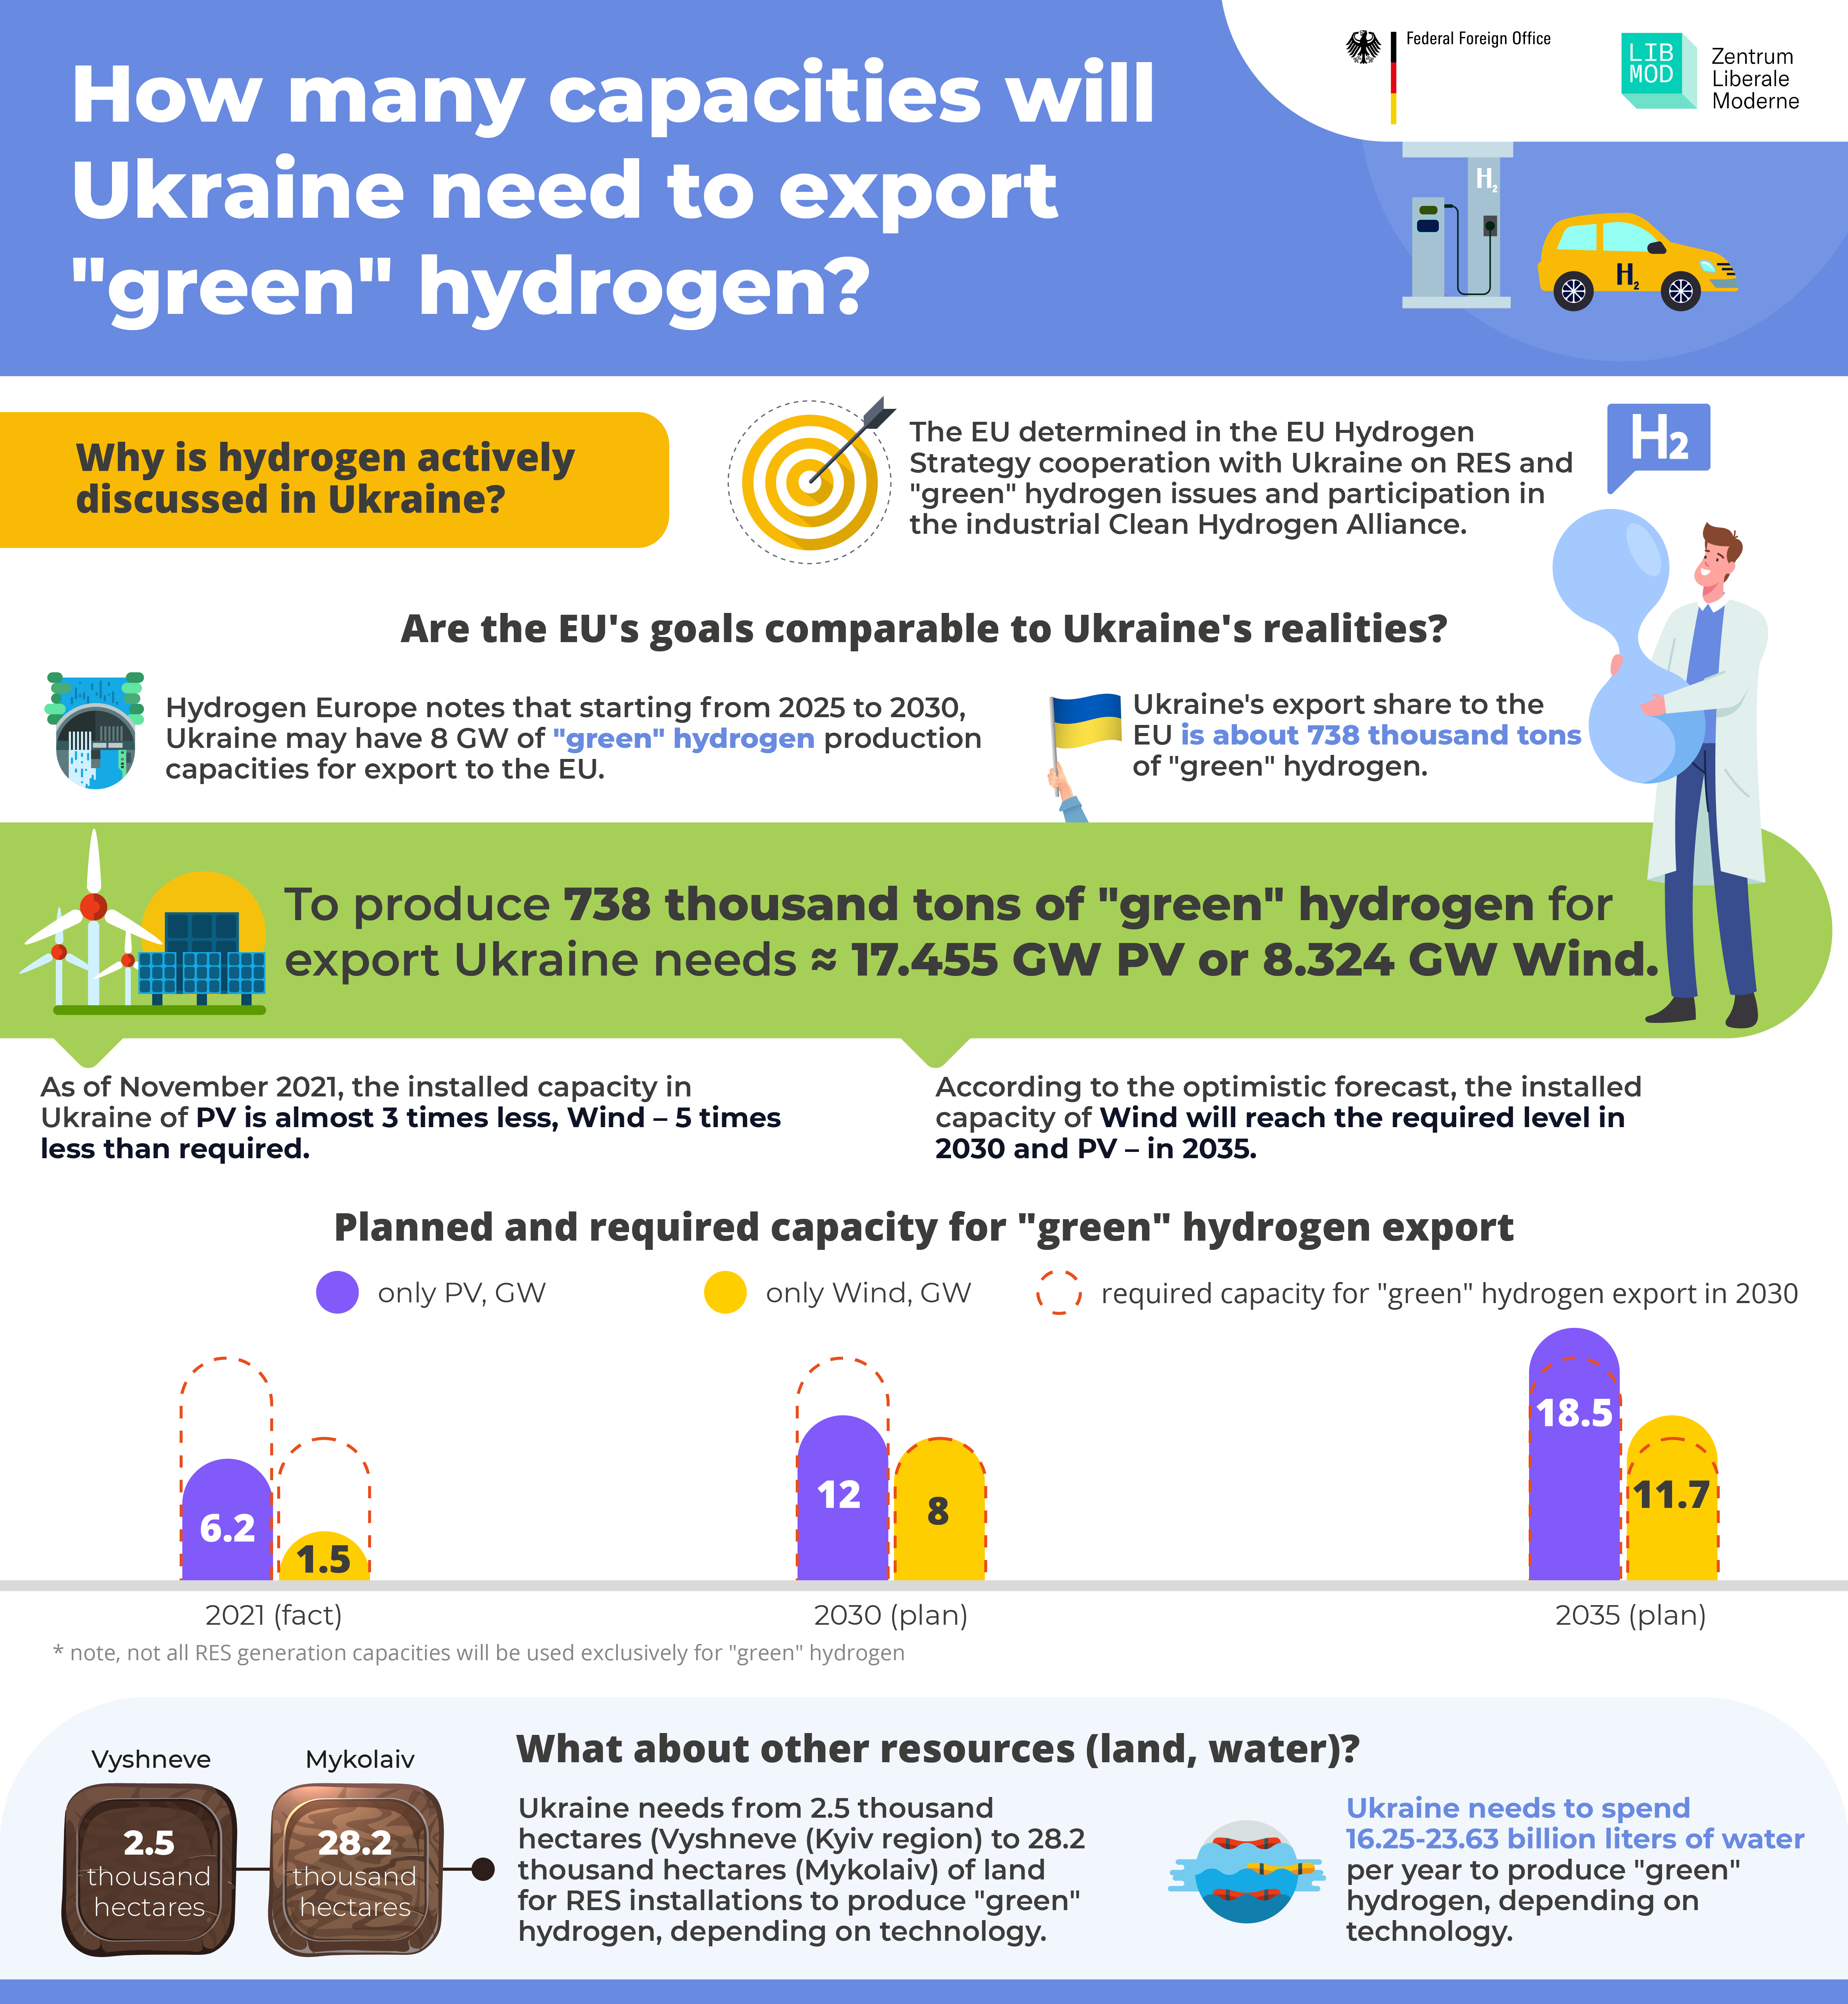 Export of “green” hydrogen from Ukraine to the EU: current capacity and future potential
